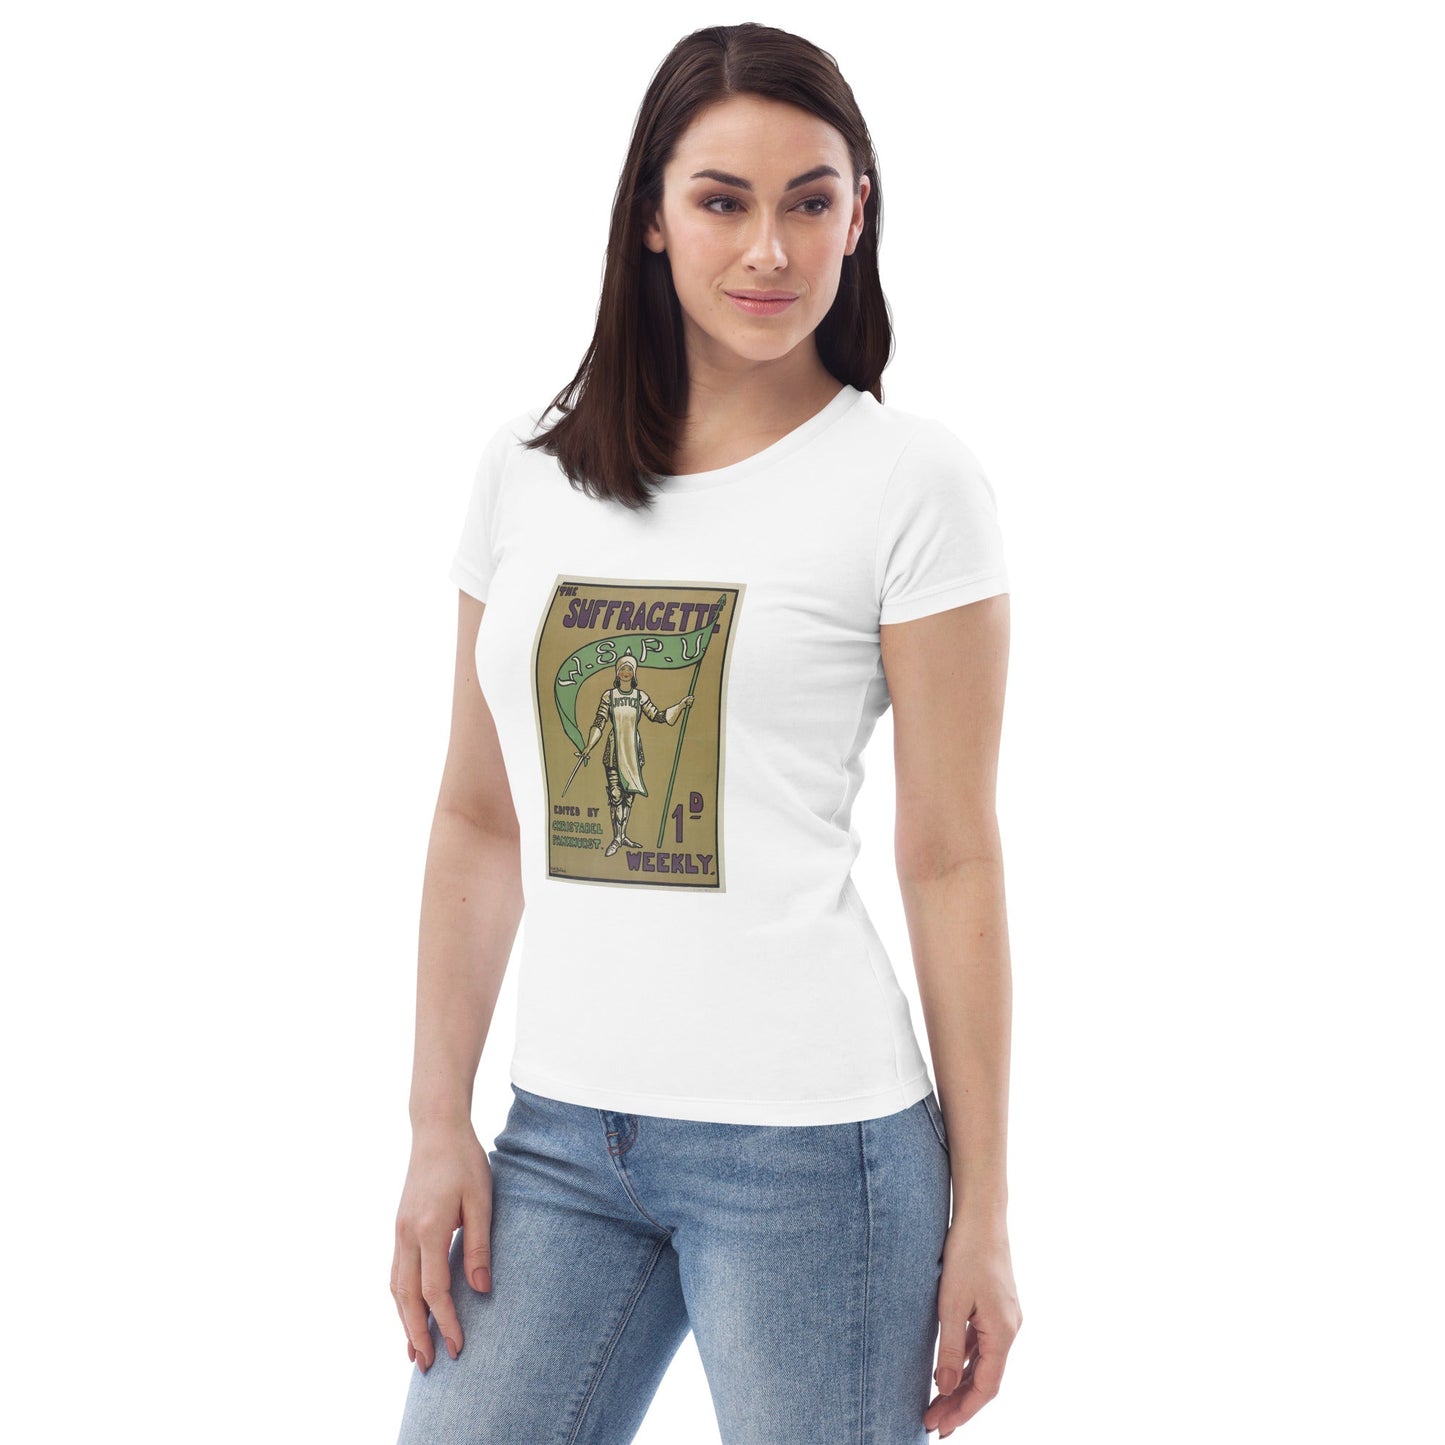 The Suffragette - Women's fitted eco tee - Souled Out World